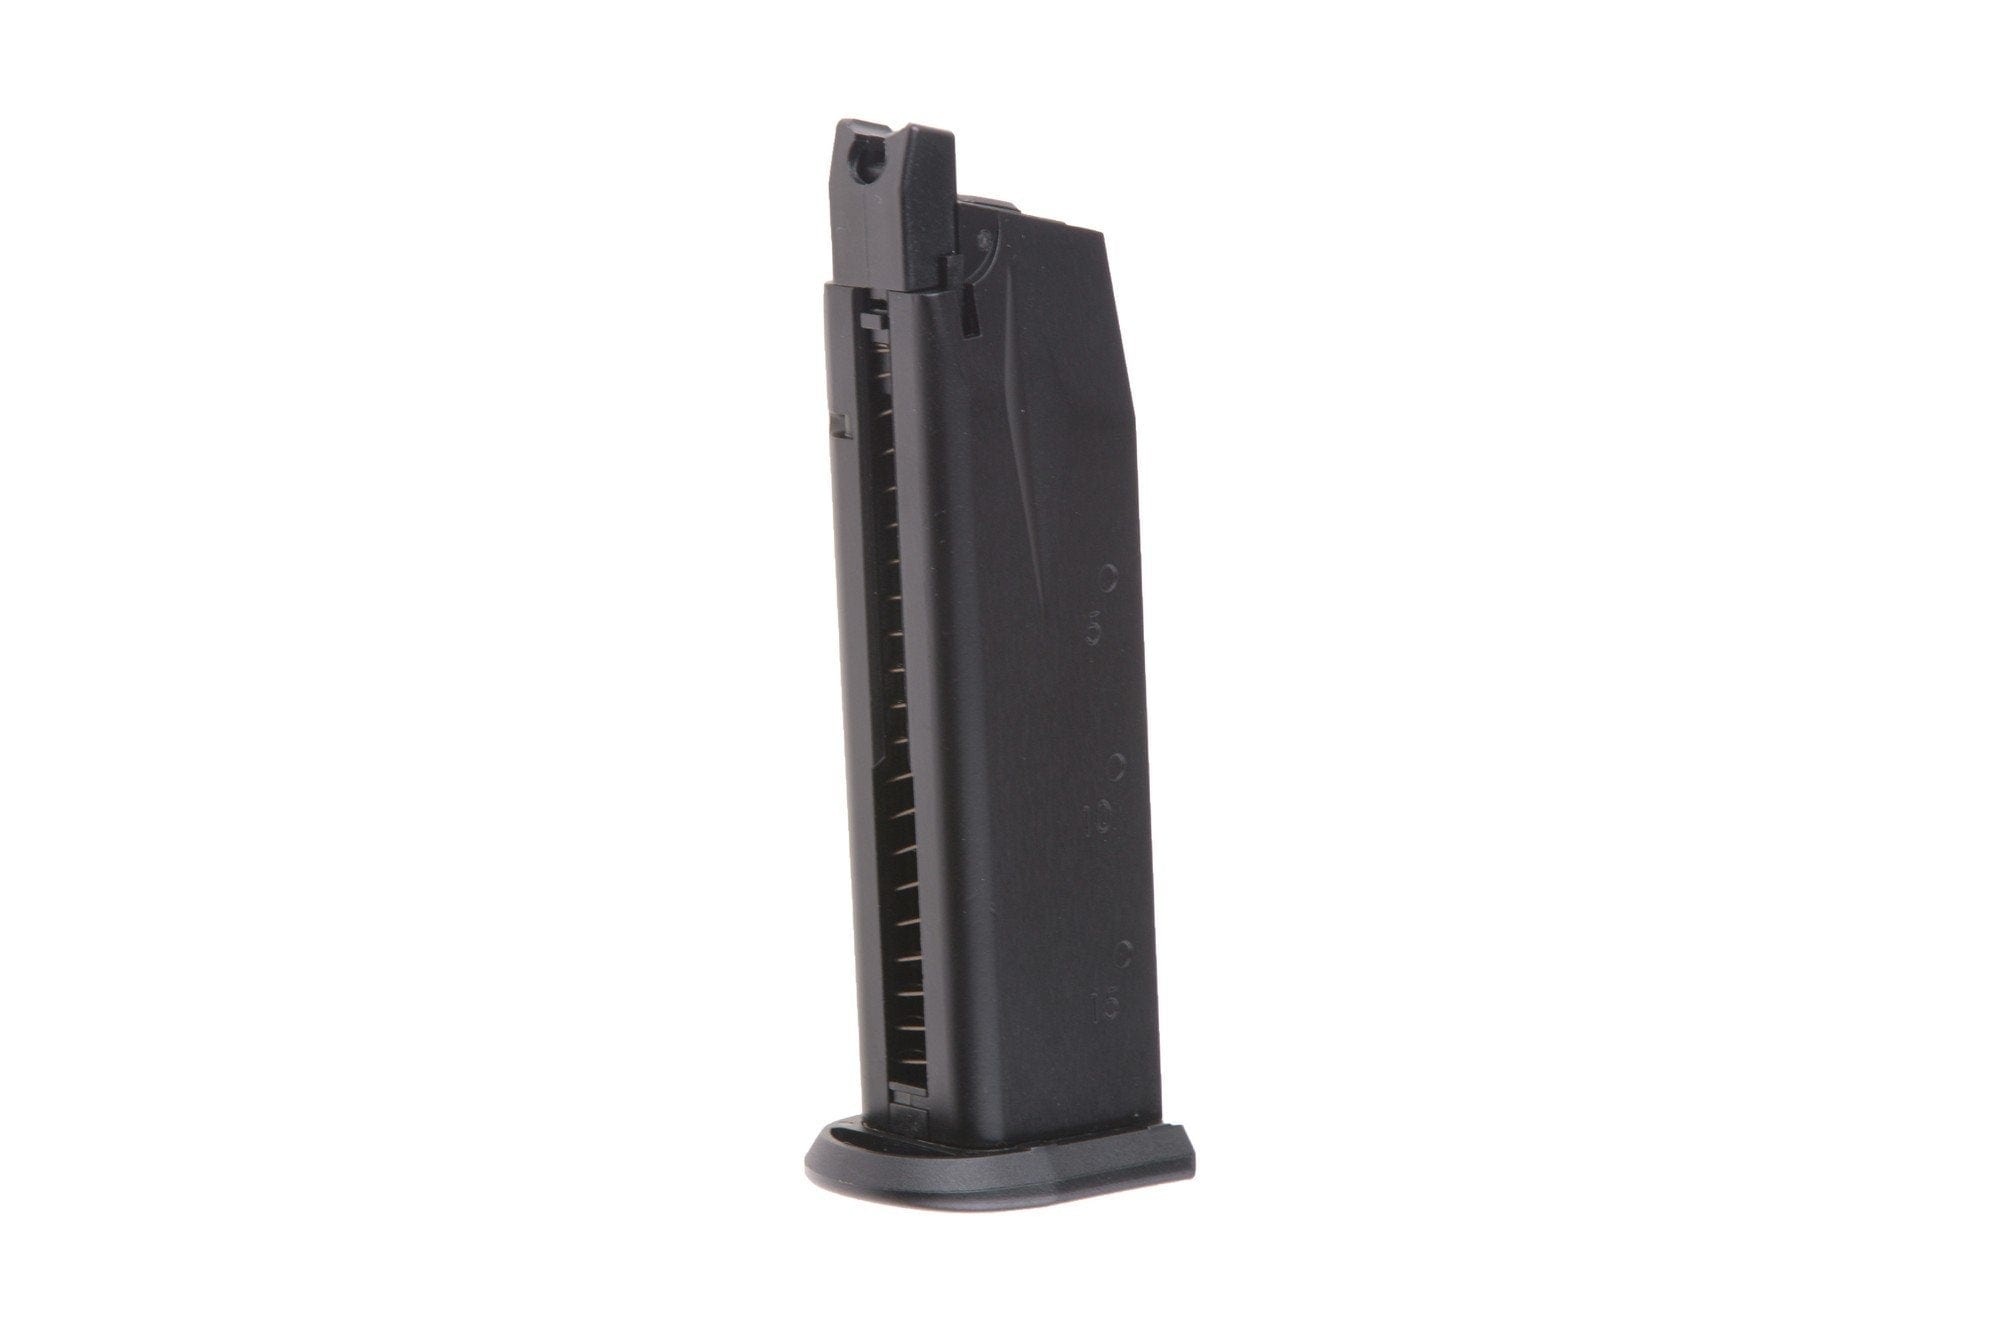 22 BB Gas Magazine for E99 Replicas by WE on Airsoft Mania Europe